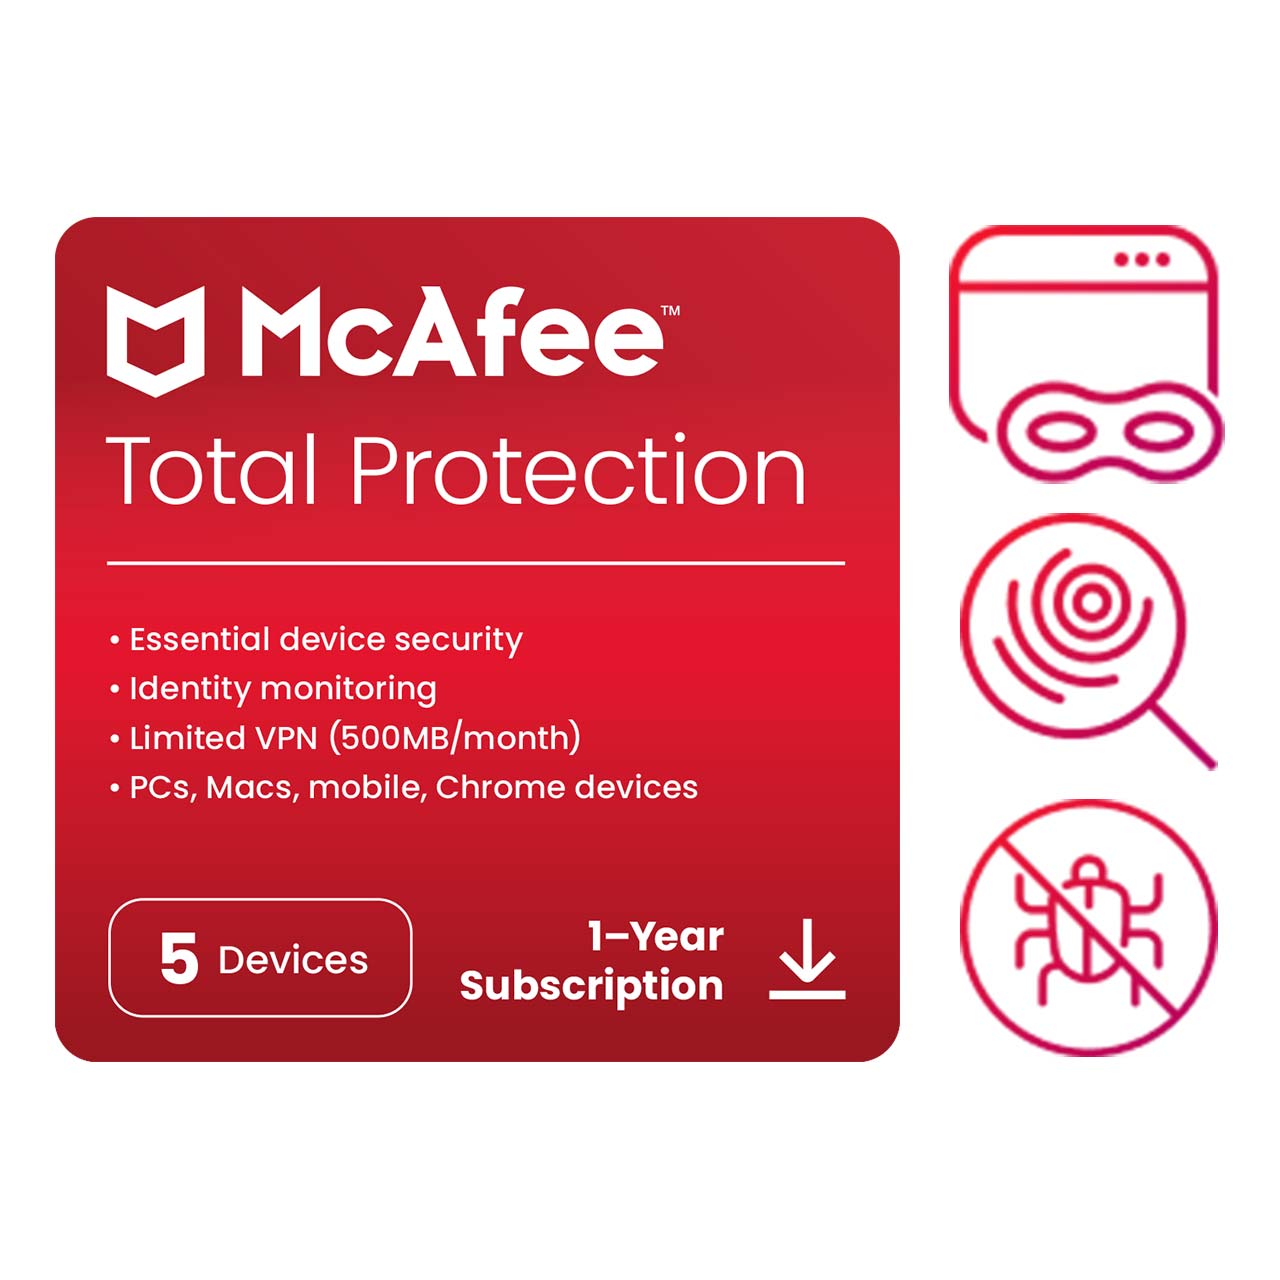 McAfee Online Protection Software